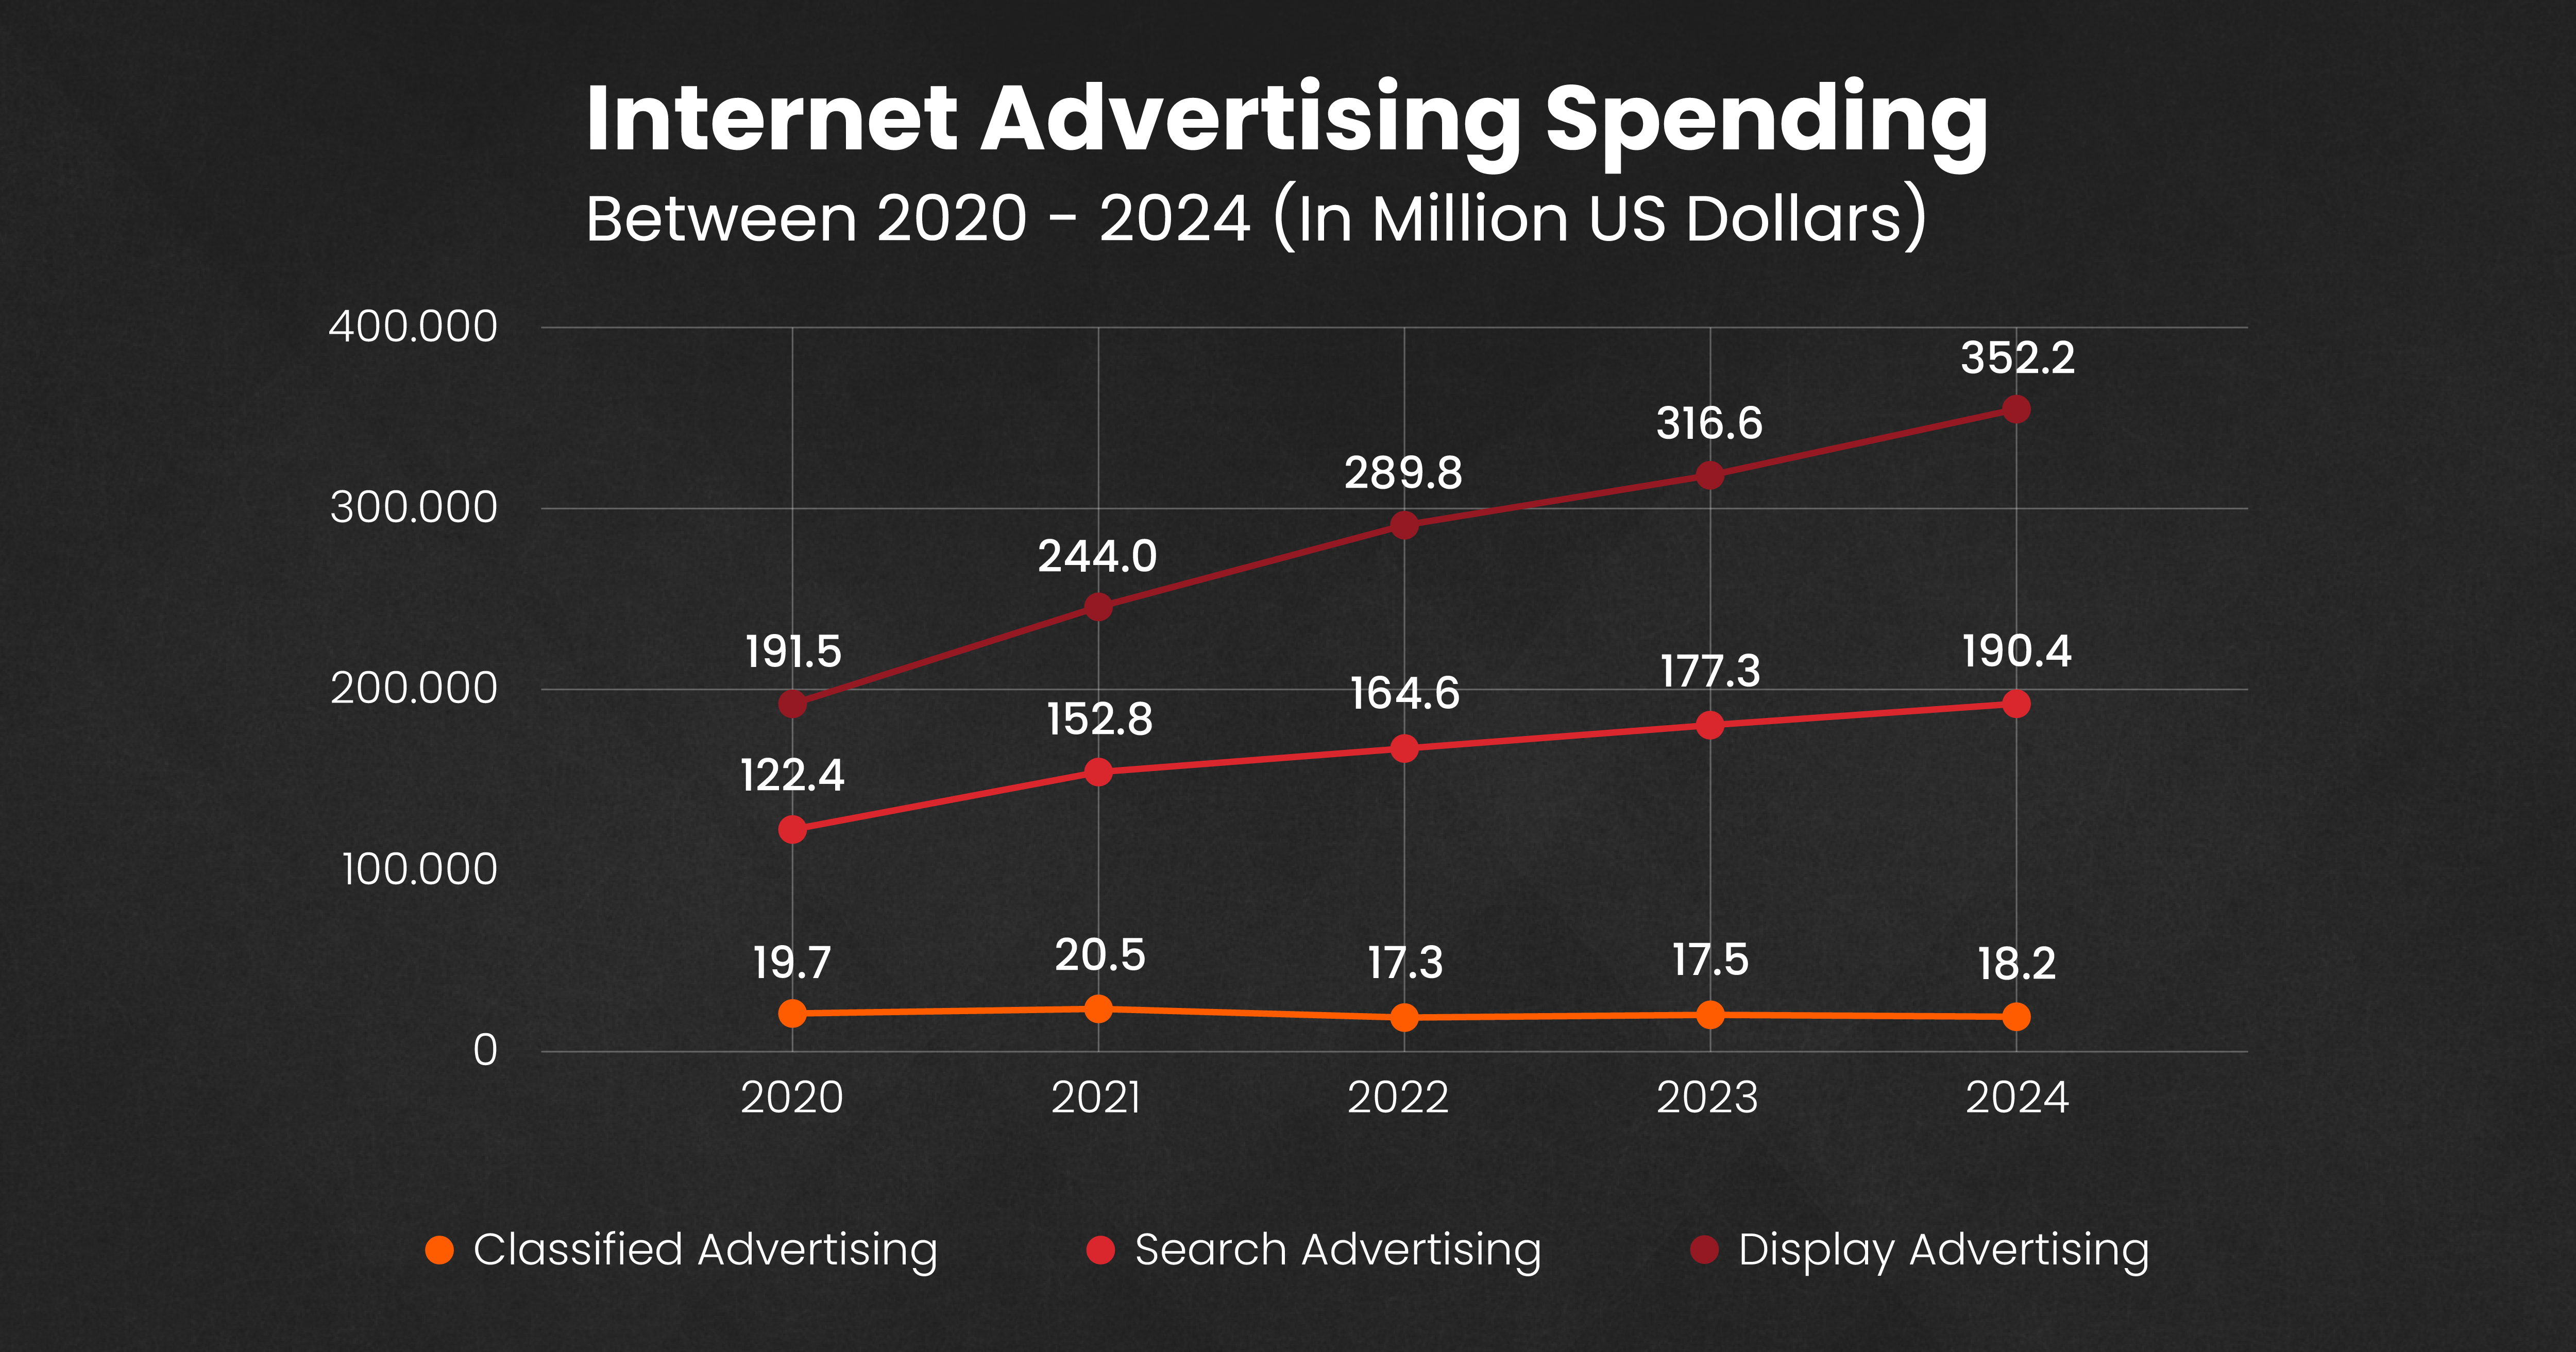 Search ads to hit $118.2B by 2024